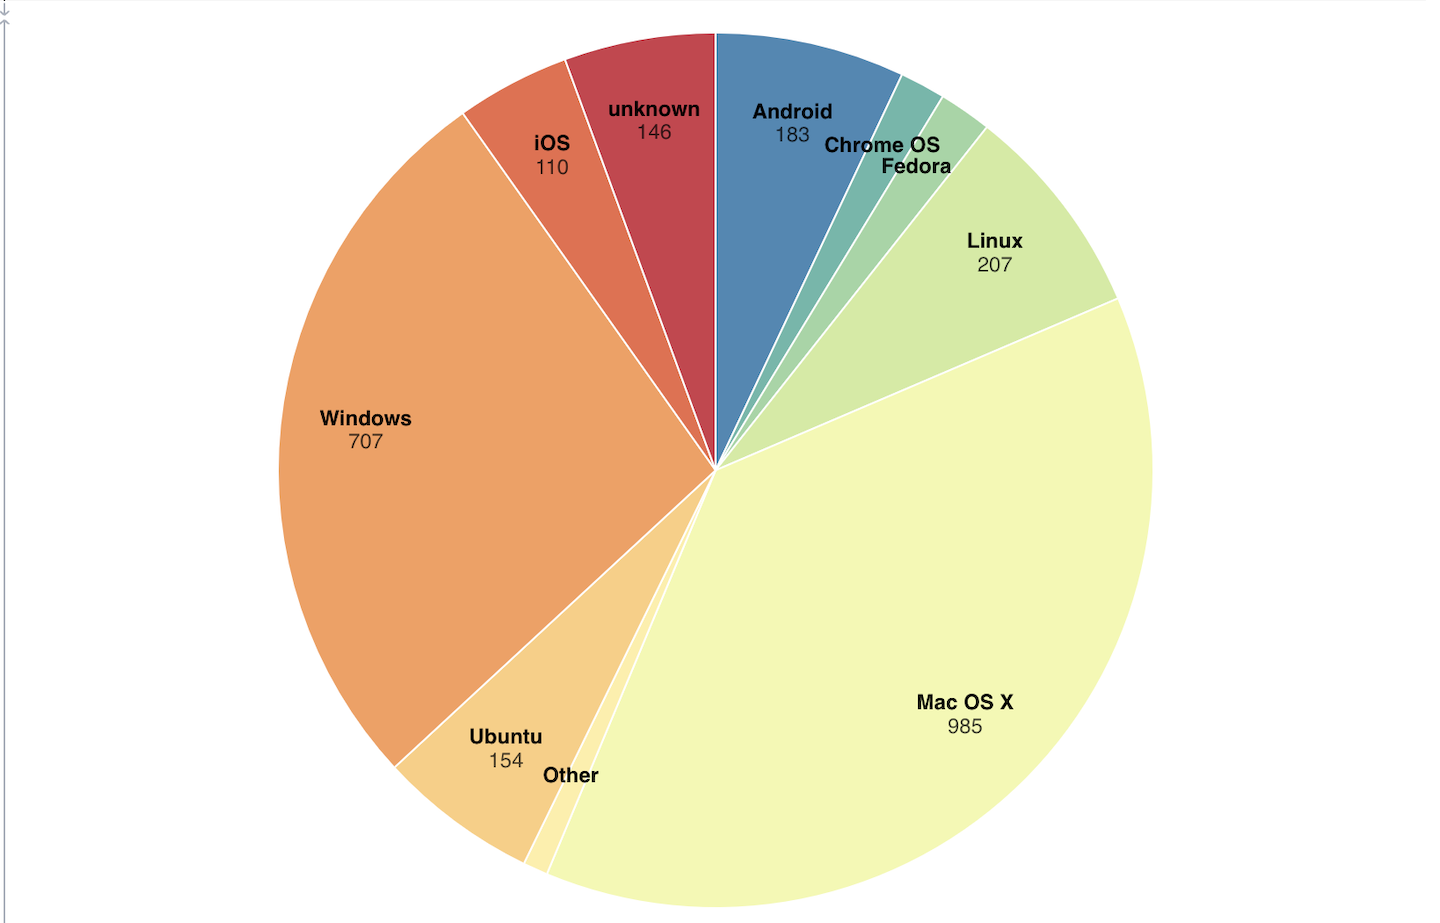 api.video Analytics: Create a pie chart showing what operating system is most popular to view